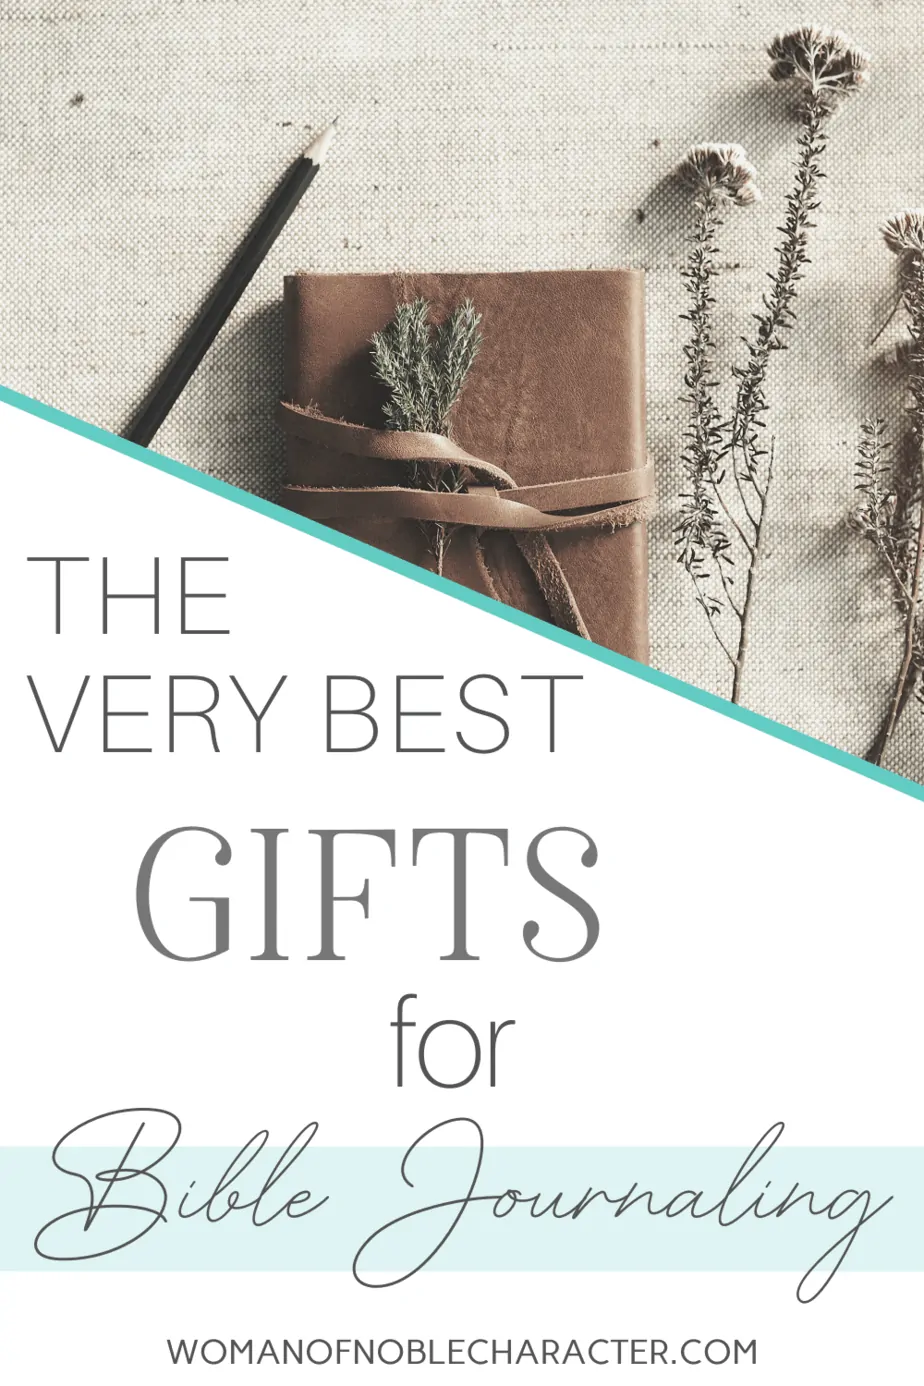 Great gifts for one who is beginning a Bible Journal